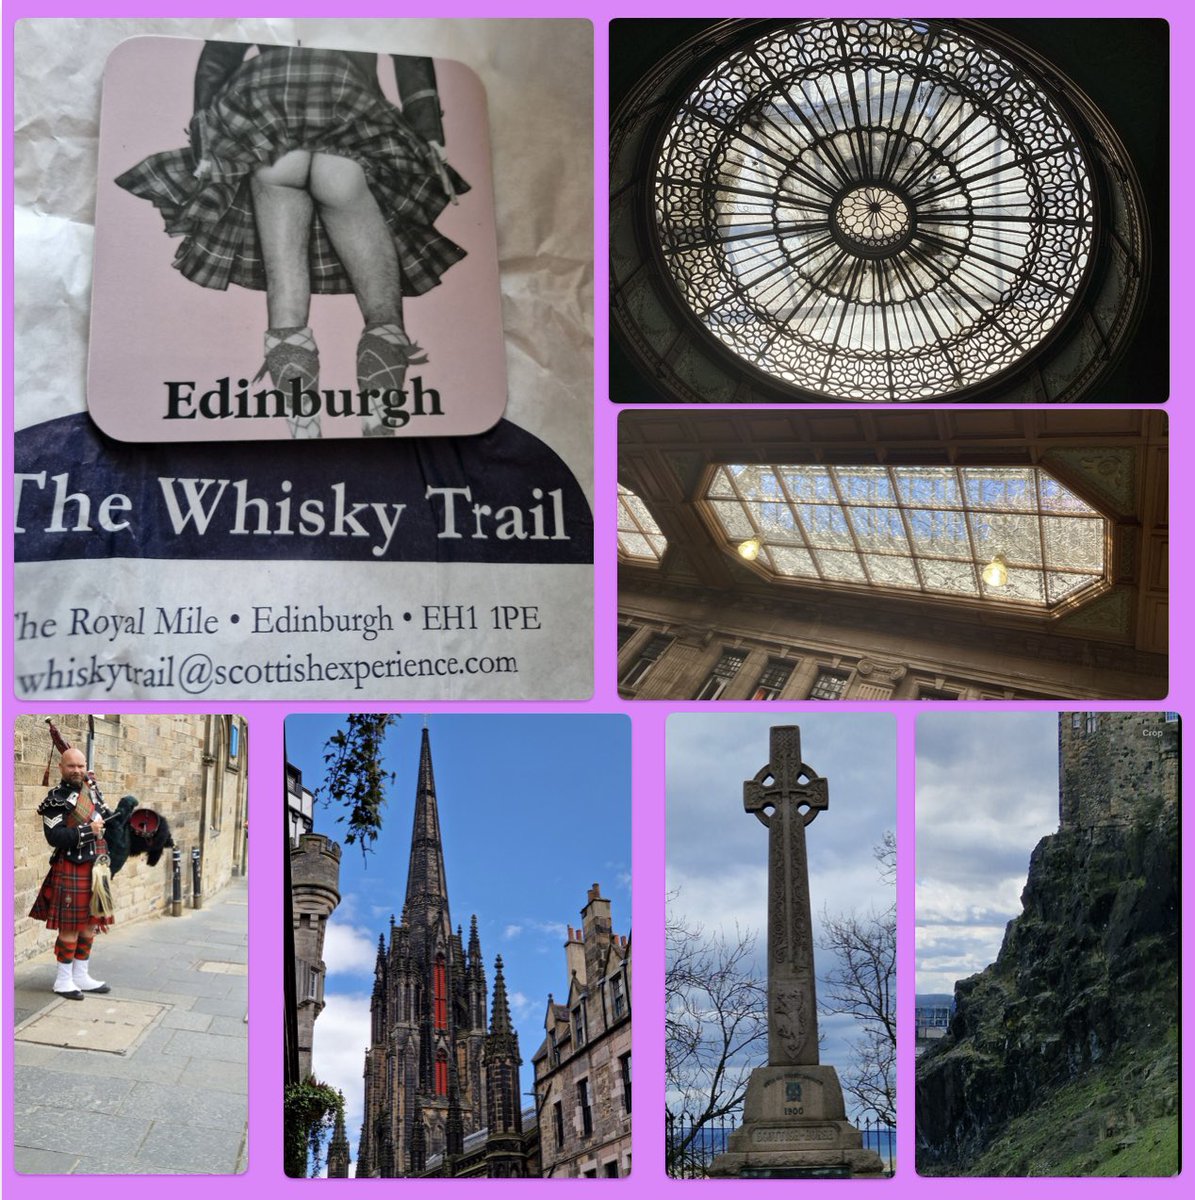 #HelloAgain #TwitterFriends a few more from yesterday’s adventure in Edinburgh 🥰 the first one reminds me of someone but I can’t think who 😂 #WaverleyStation #ILoveScotland #SaturdayFunday